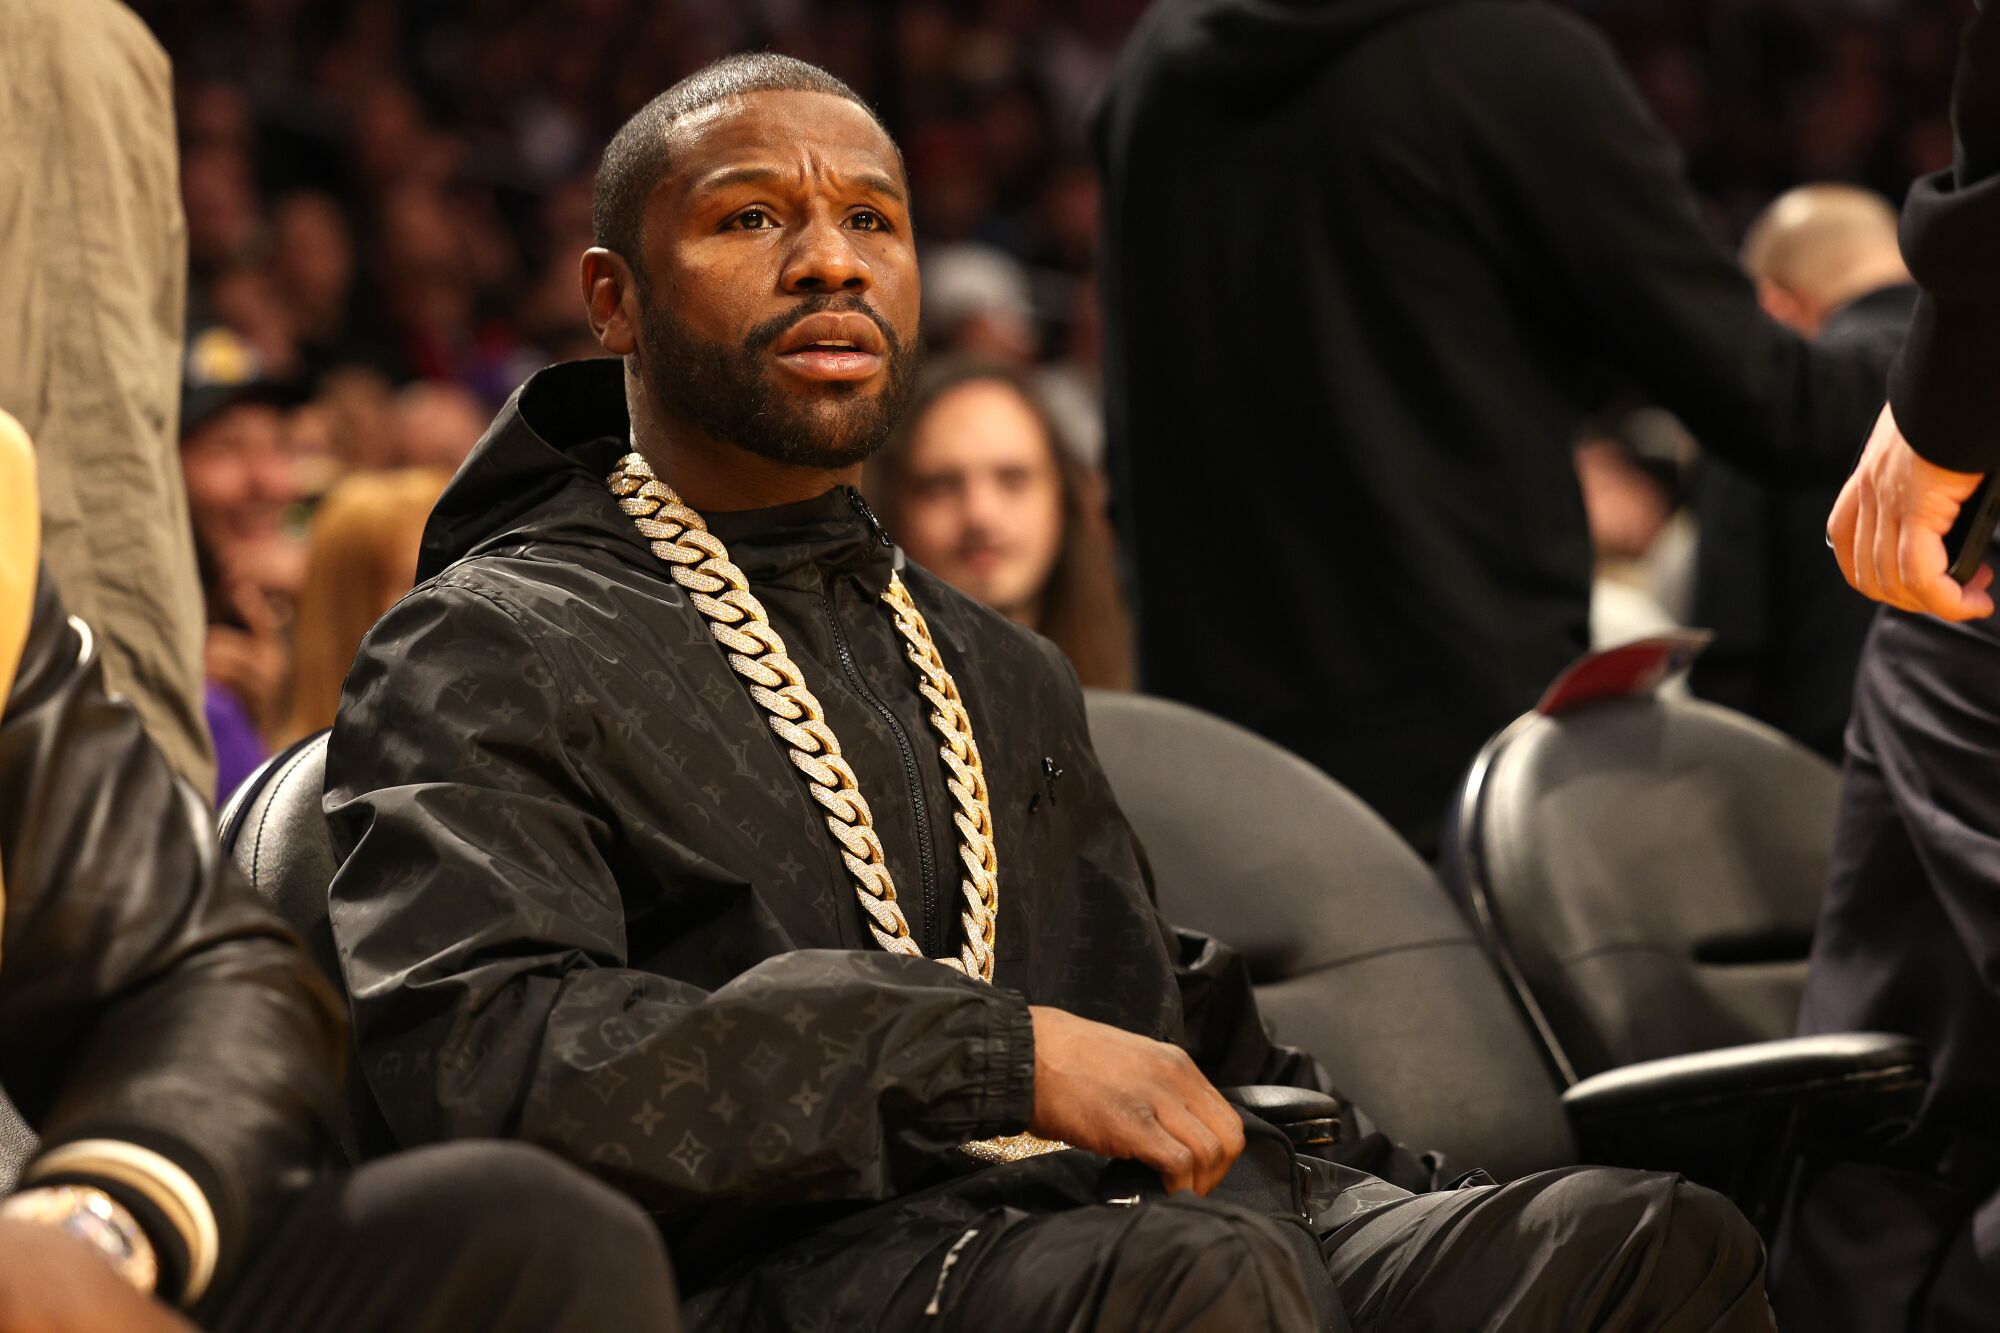 Retired boxer Floyd Mayweather Jr. attends the game between the Lakers and Thunder.